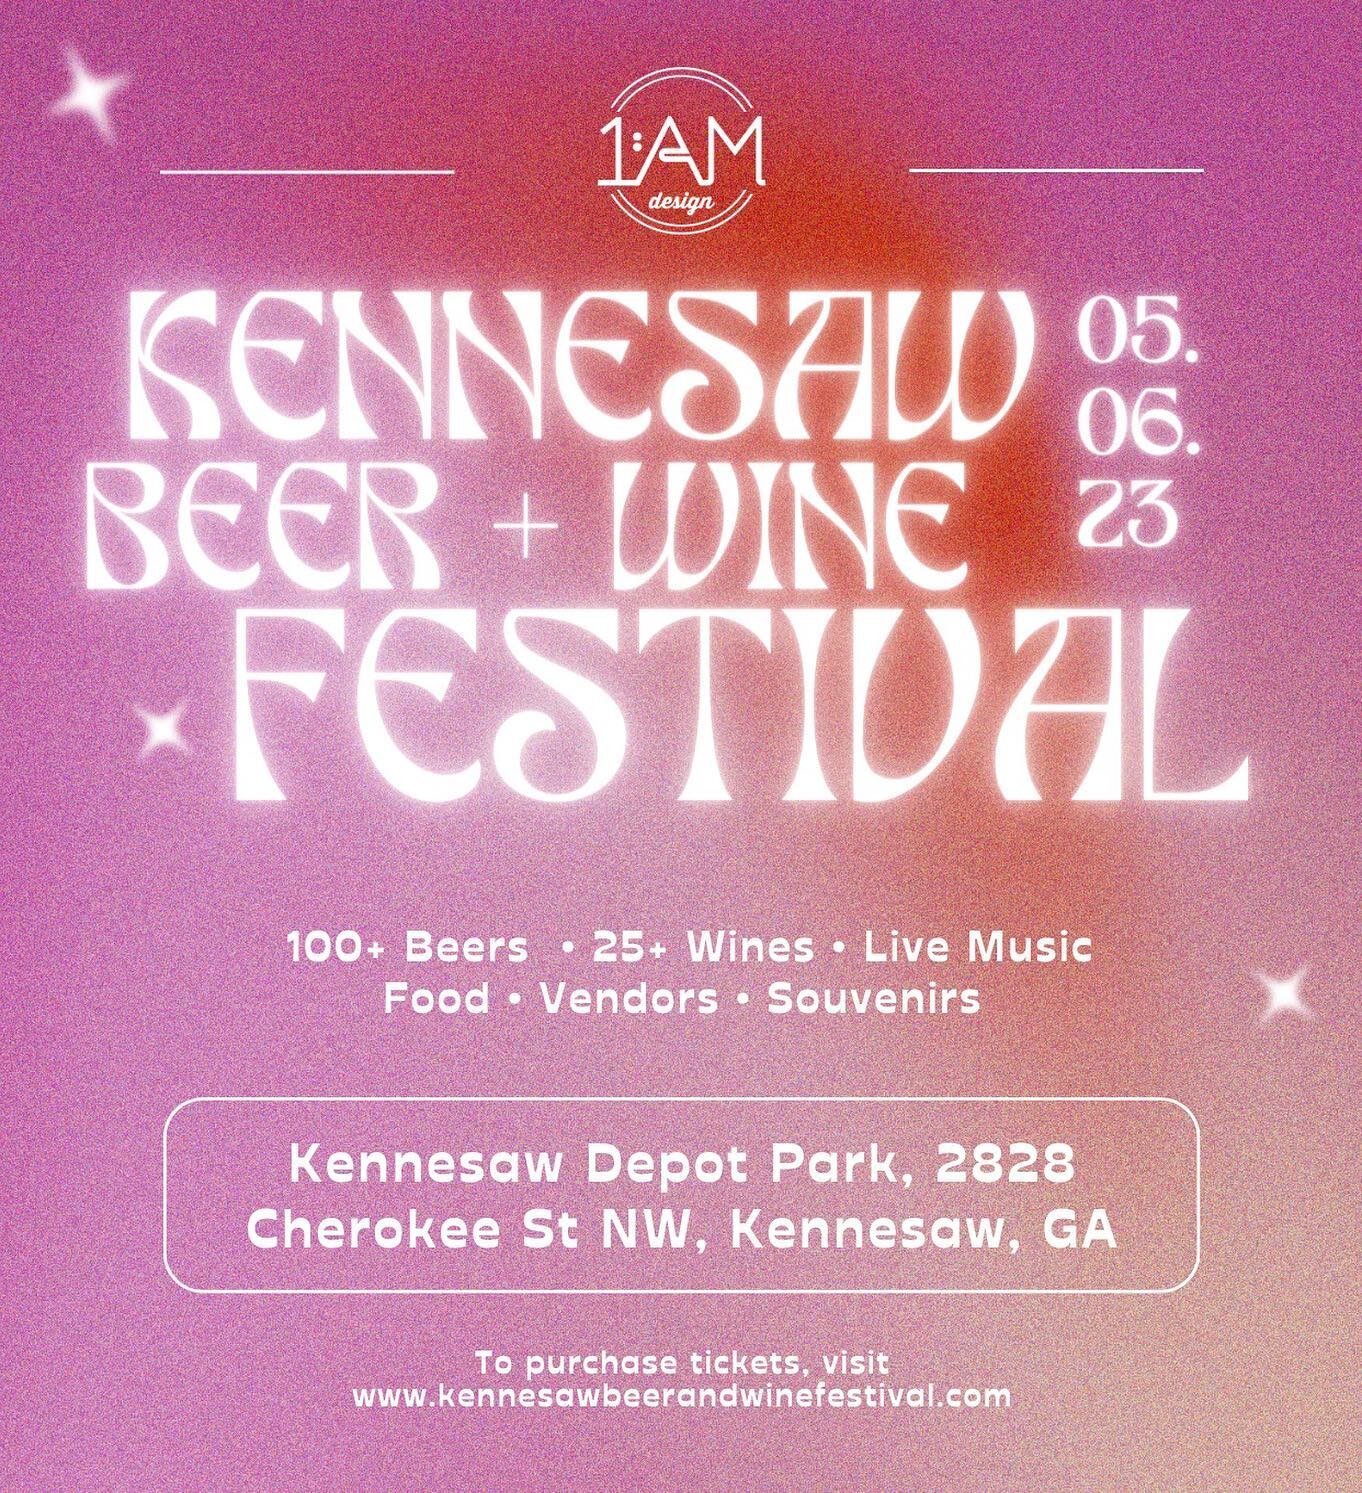 Come stop by our booth at the Kennesaw Beer + Wine festival tomorrow @ 1pm! Tickets available at www.kennesawbeerandwinefestival.com 🌿🪩☀️
-
-
-
#festival #graphicdesign #kennesaw #atlanta #graphics